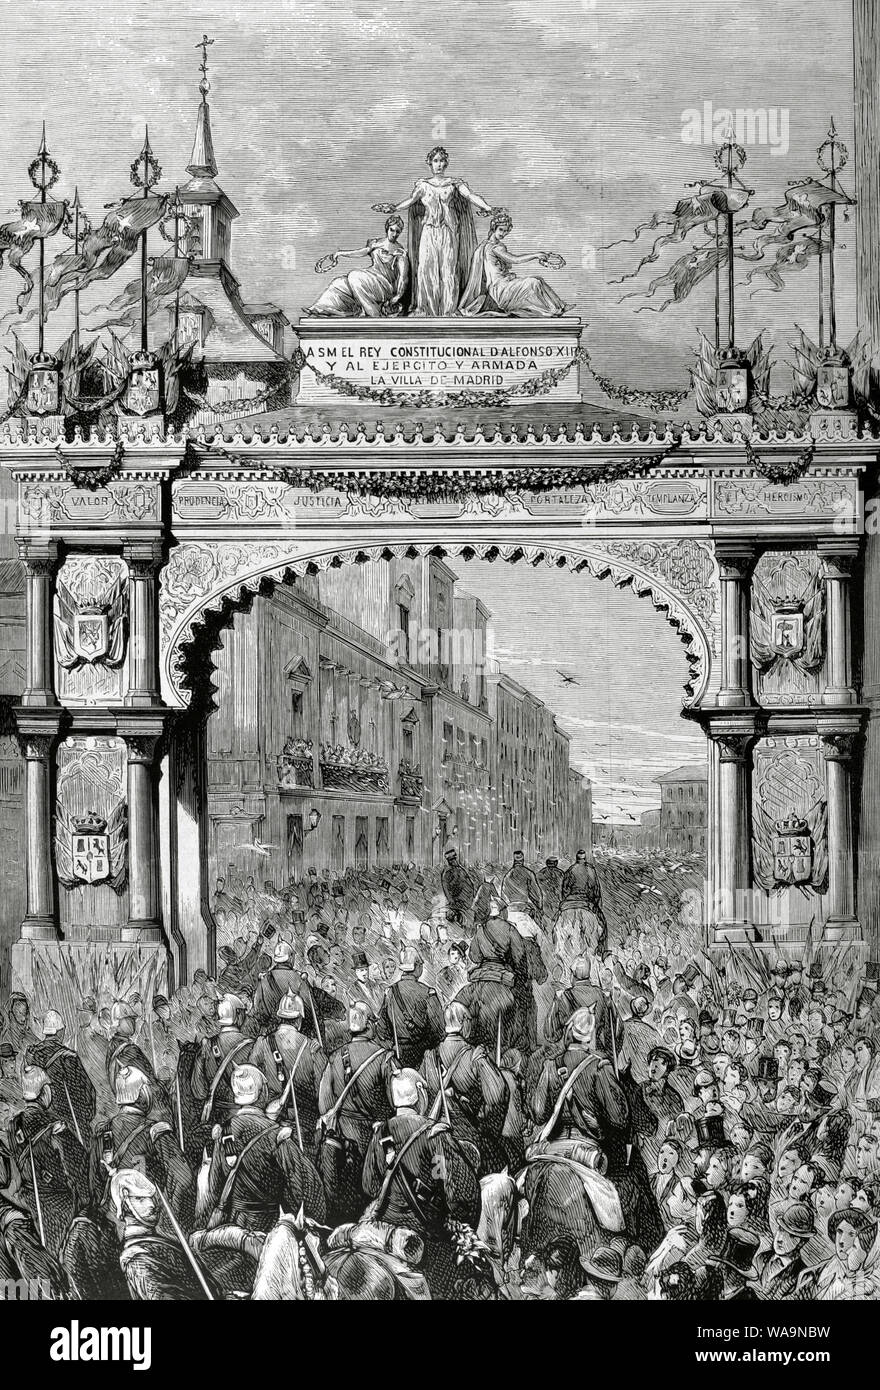 History of Spain. The Bourbon Restoration. Reign of Alfonso XII (1874-1885). Madrid. Triumphal arch erected at the expense of the City Council, next to The Villa Square (Plaza de la Villa), to greet the King Alfonso XII, on March 20, 1876, after the end of the Carlist wars. Engraving. La Ilustracion Española y Americana. April 30, 1876. Stock Photo